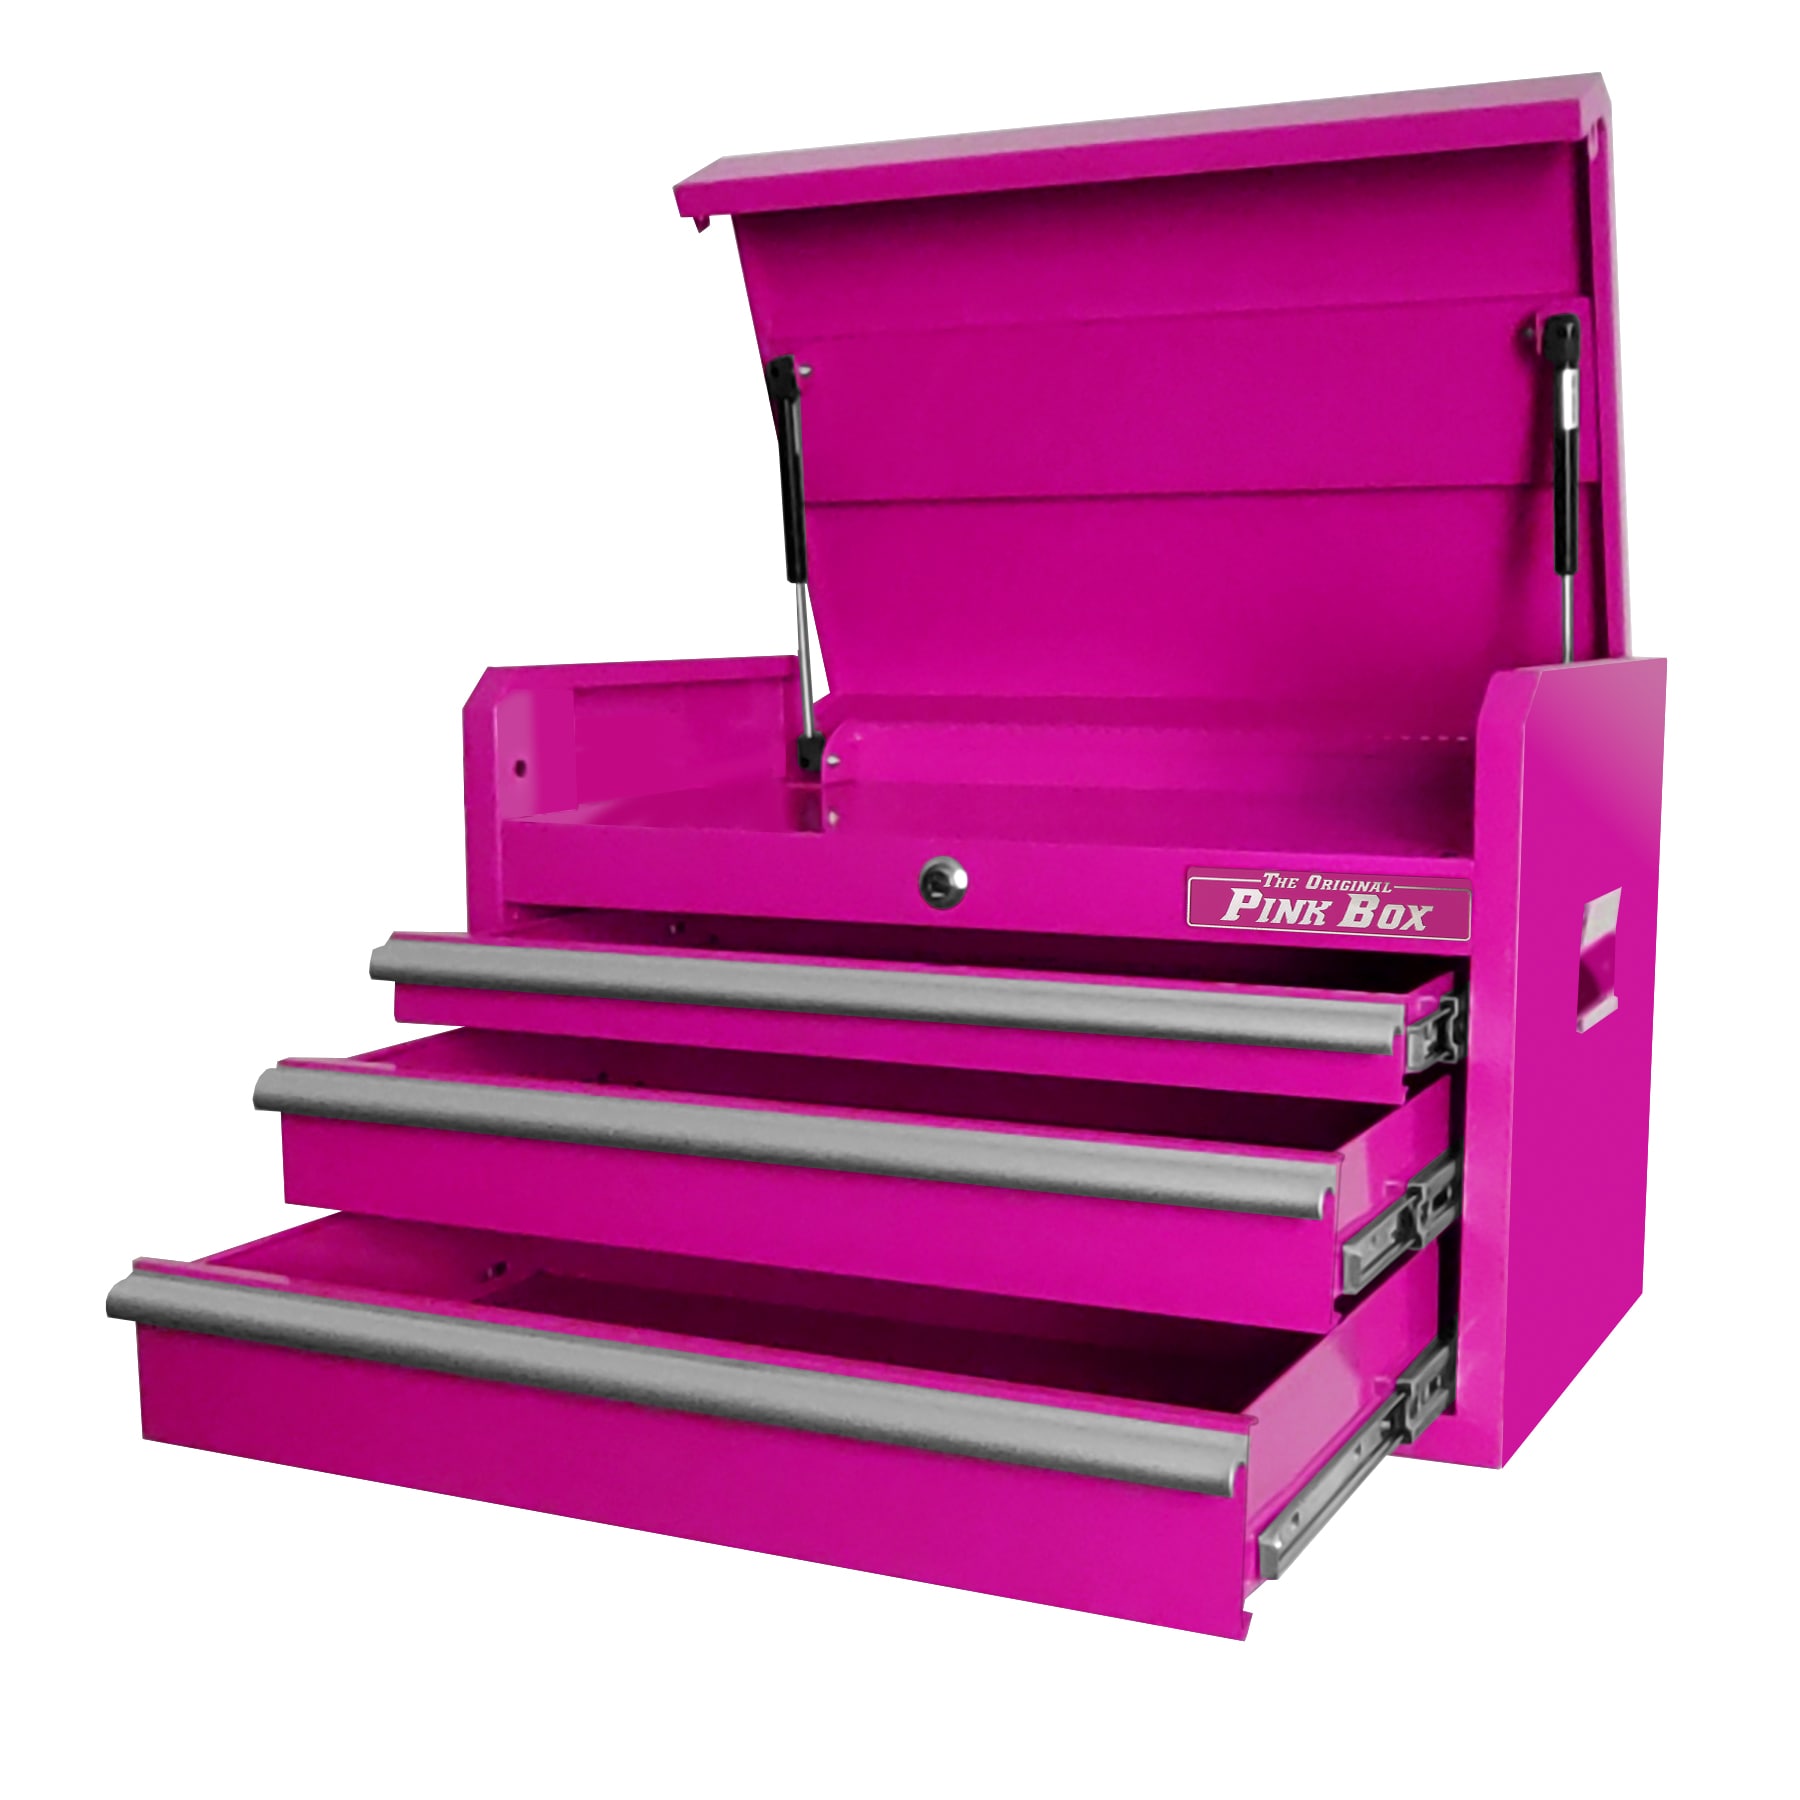 The Original Pink Box 26-in W x 65.25-in H 10 Ball-bearing Steel